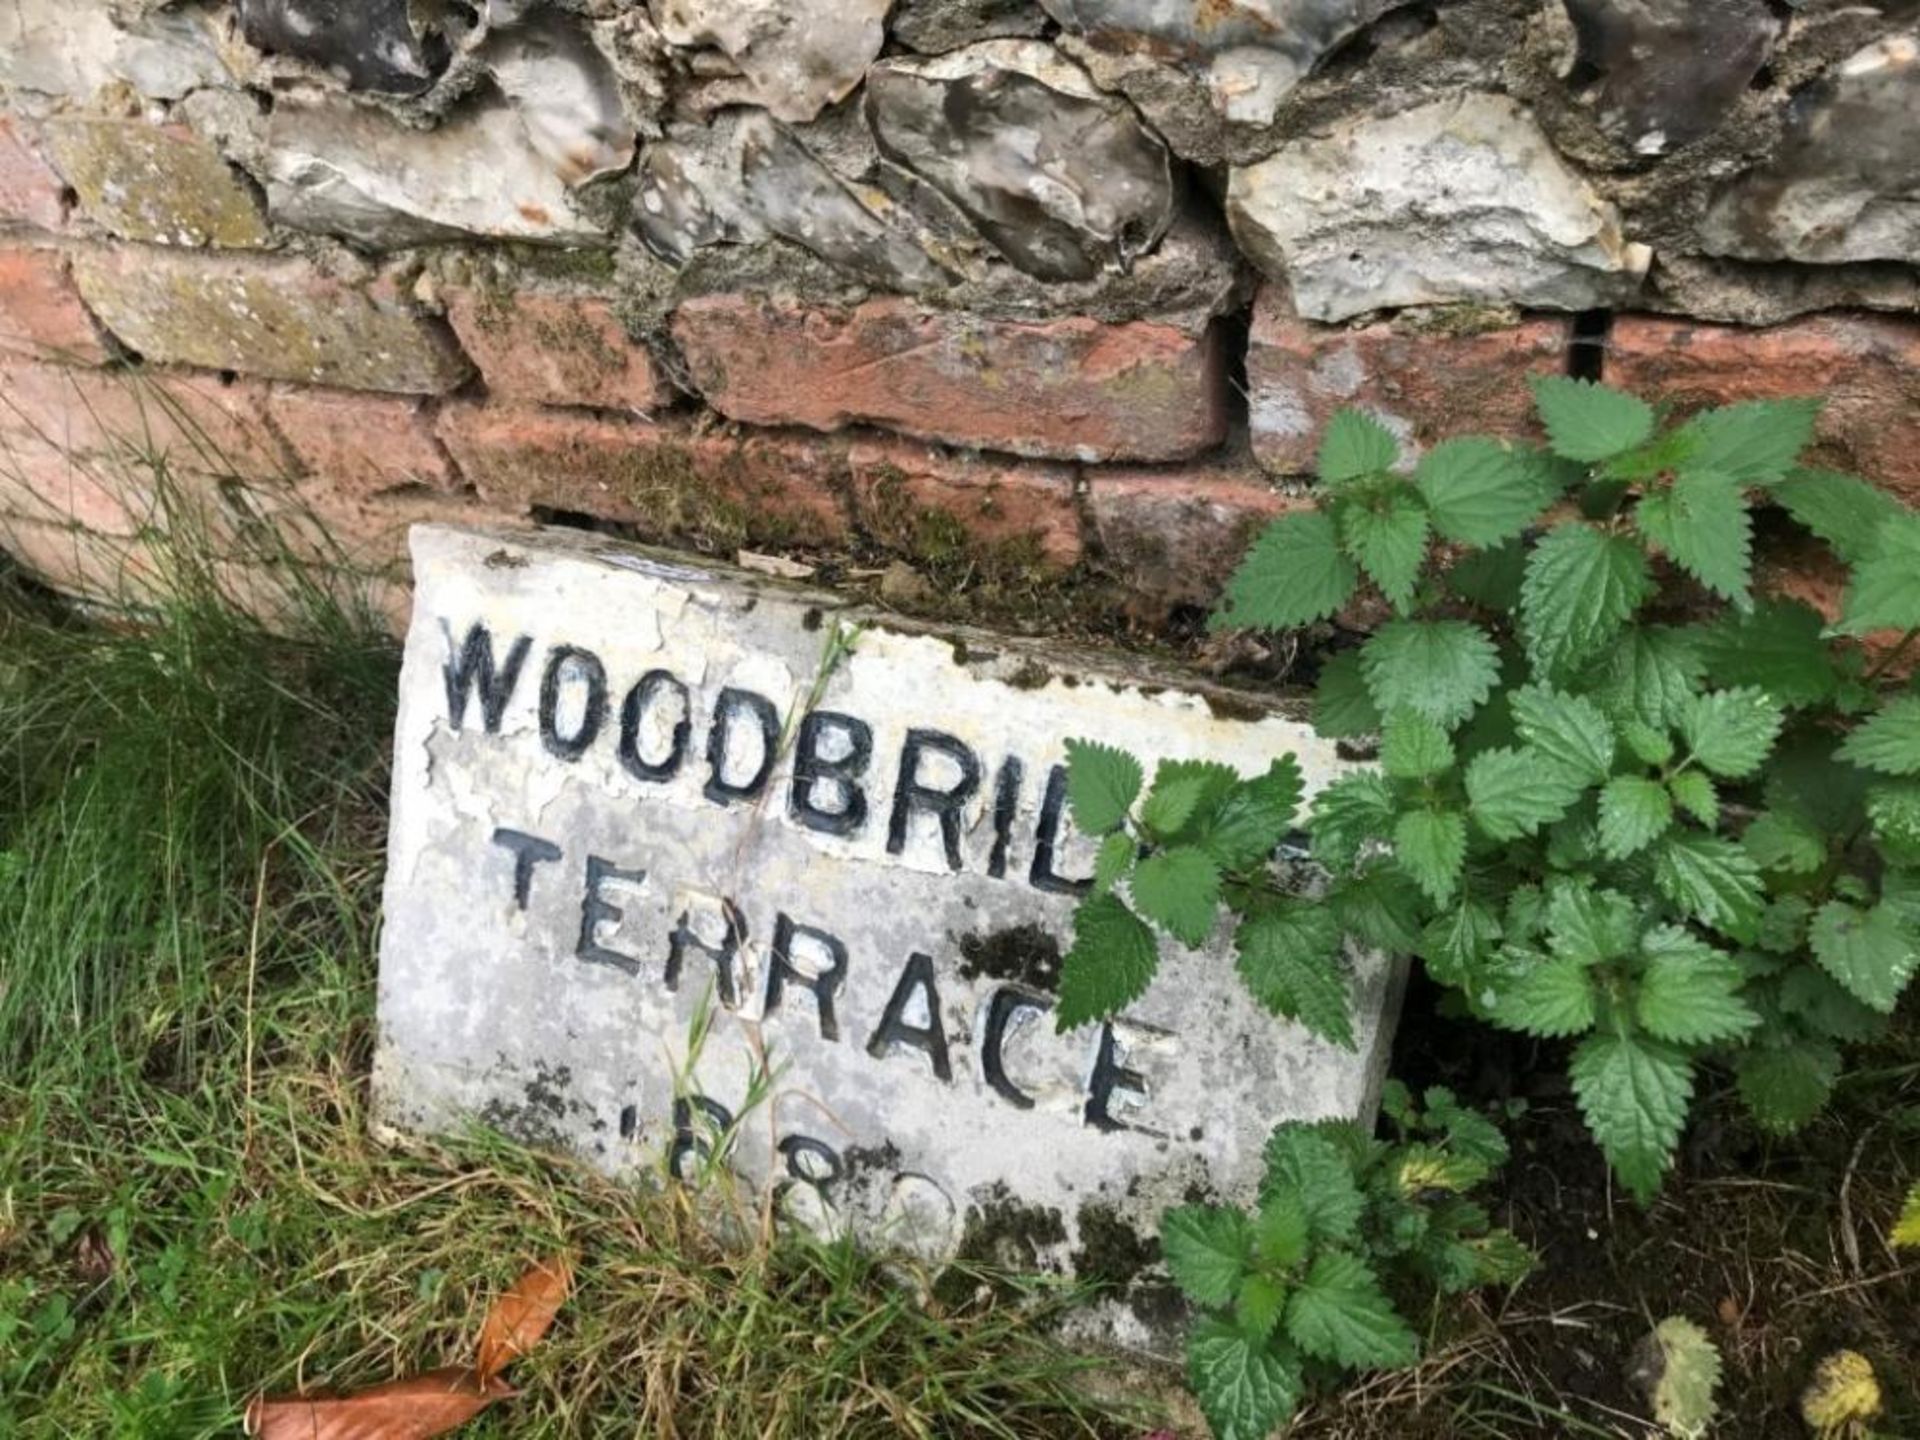 1 x Reclamation aged Stone Slab 'Woodbridge Terrace 1880' - Ref: JB185 - Pre-Owned - NO VAT ON THE - Image 4 of 5